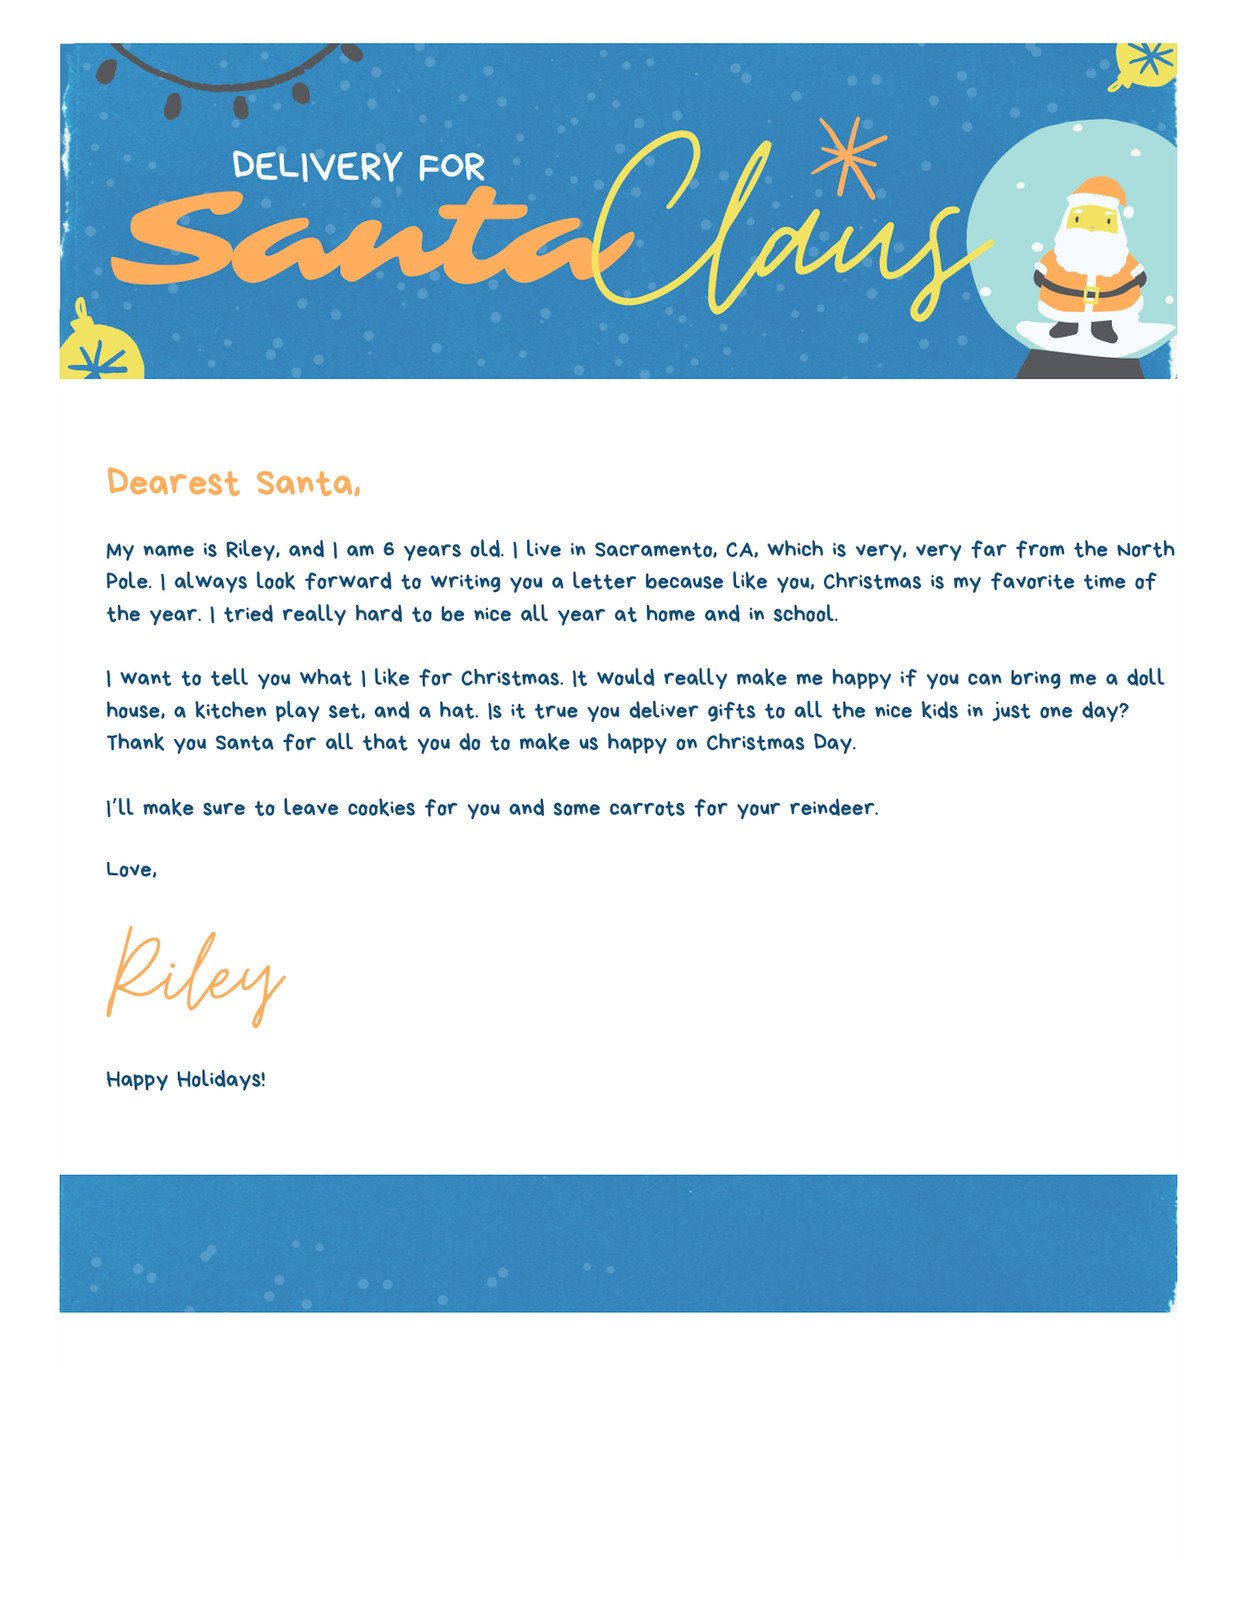 Christmas Letter Doc in Blue Orange Bright Yellow Playful Illustrative Style